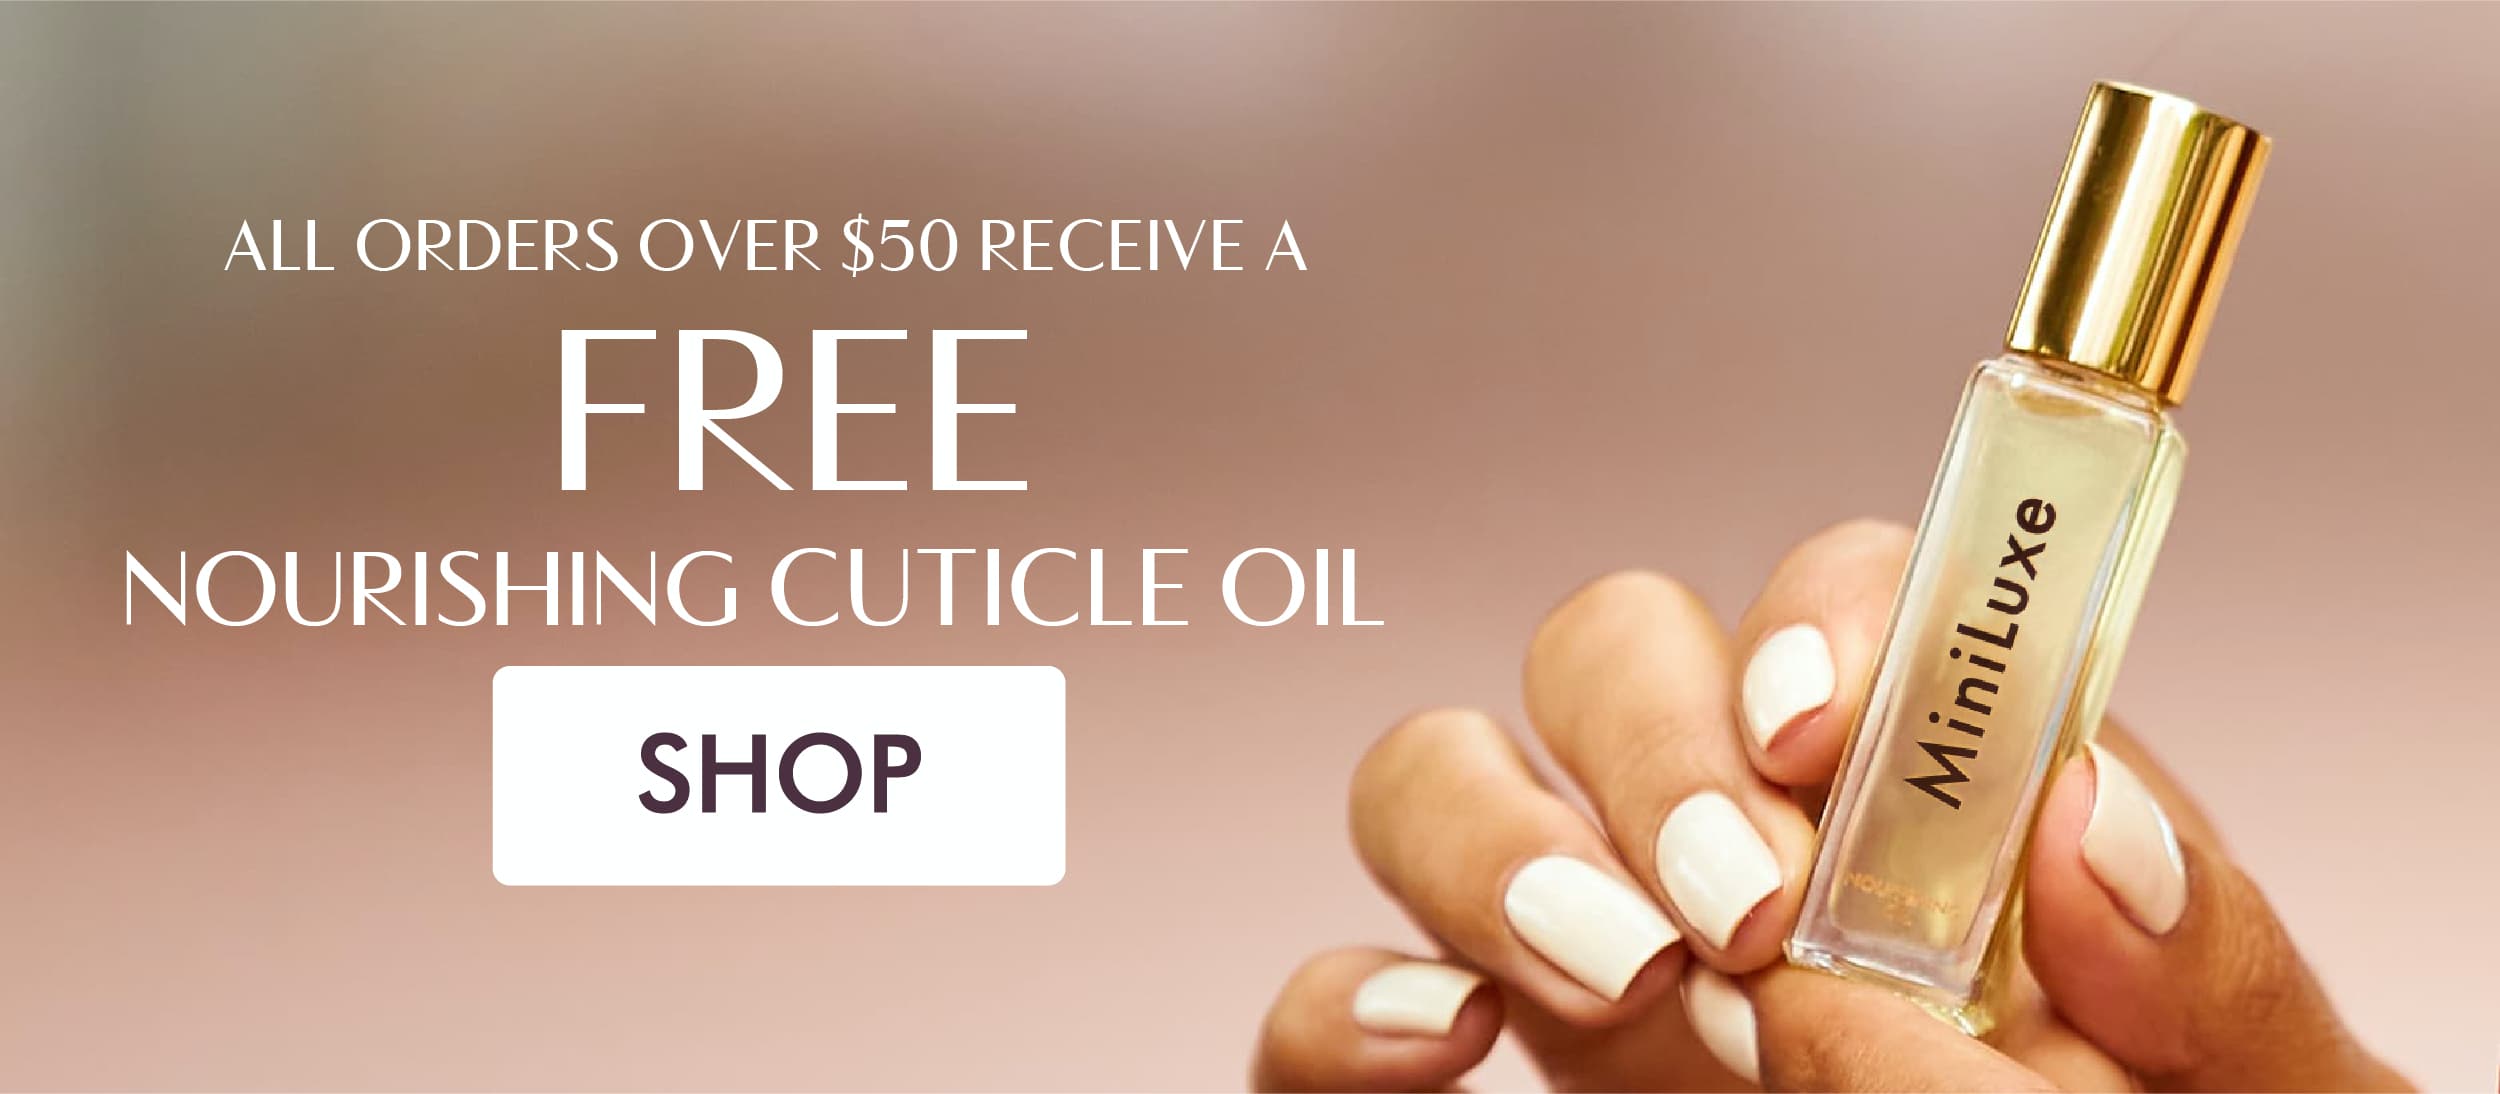 All Orders Over $50 Receive A Free Nourishing Cuticle Oil